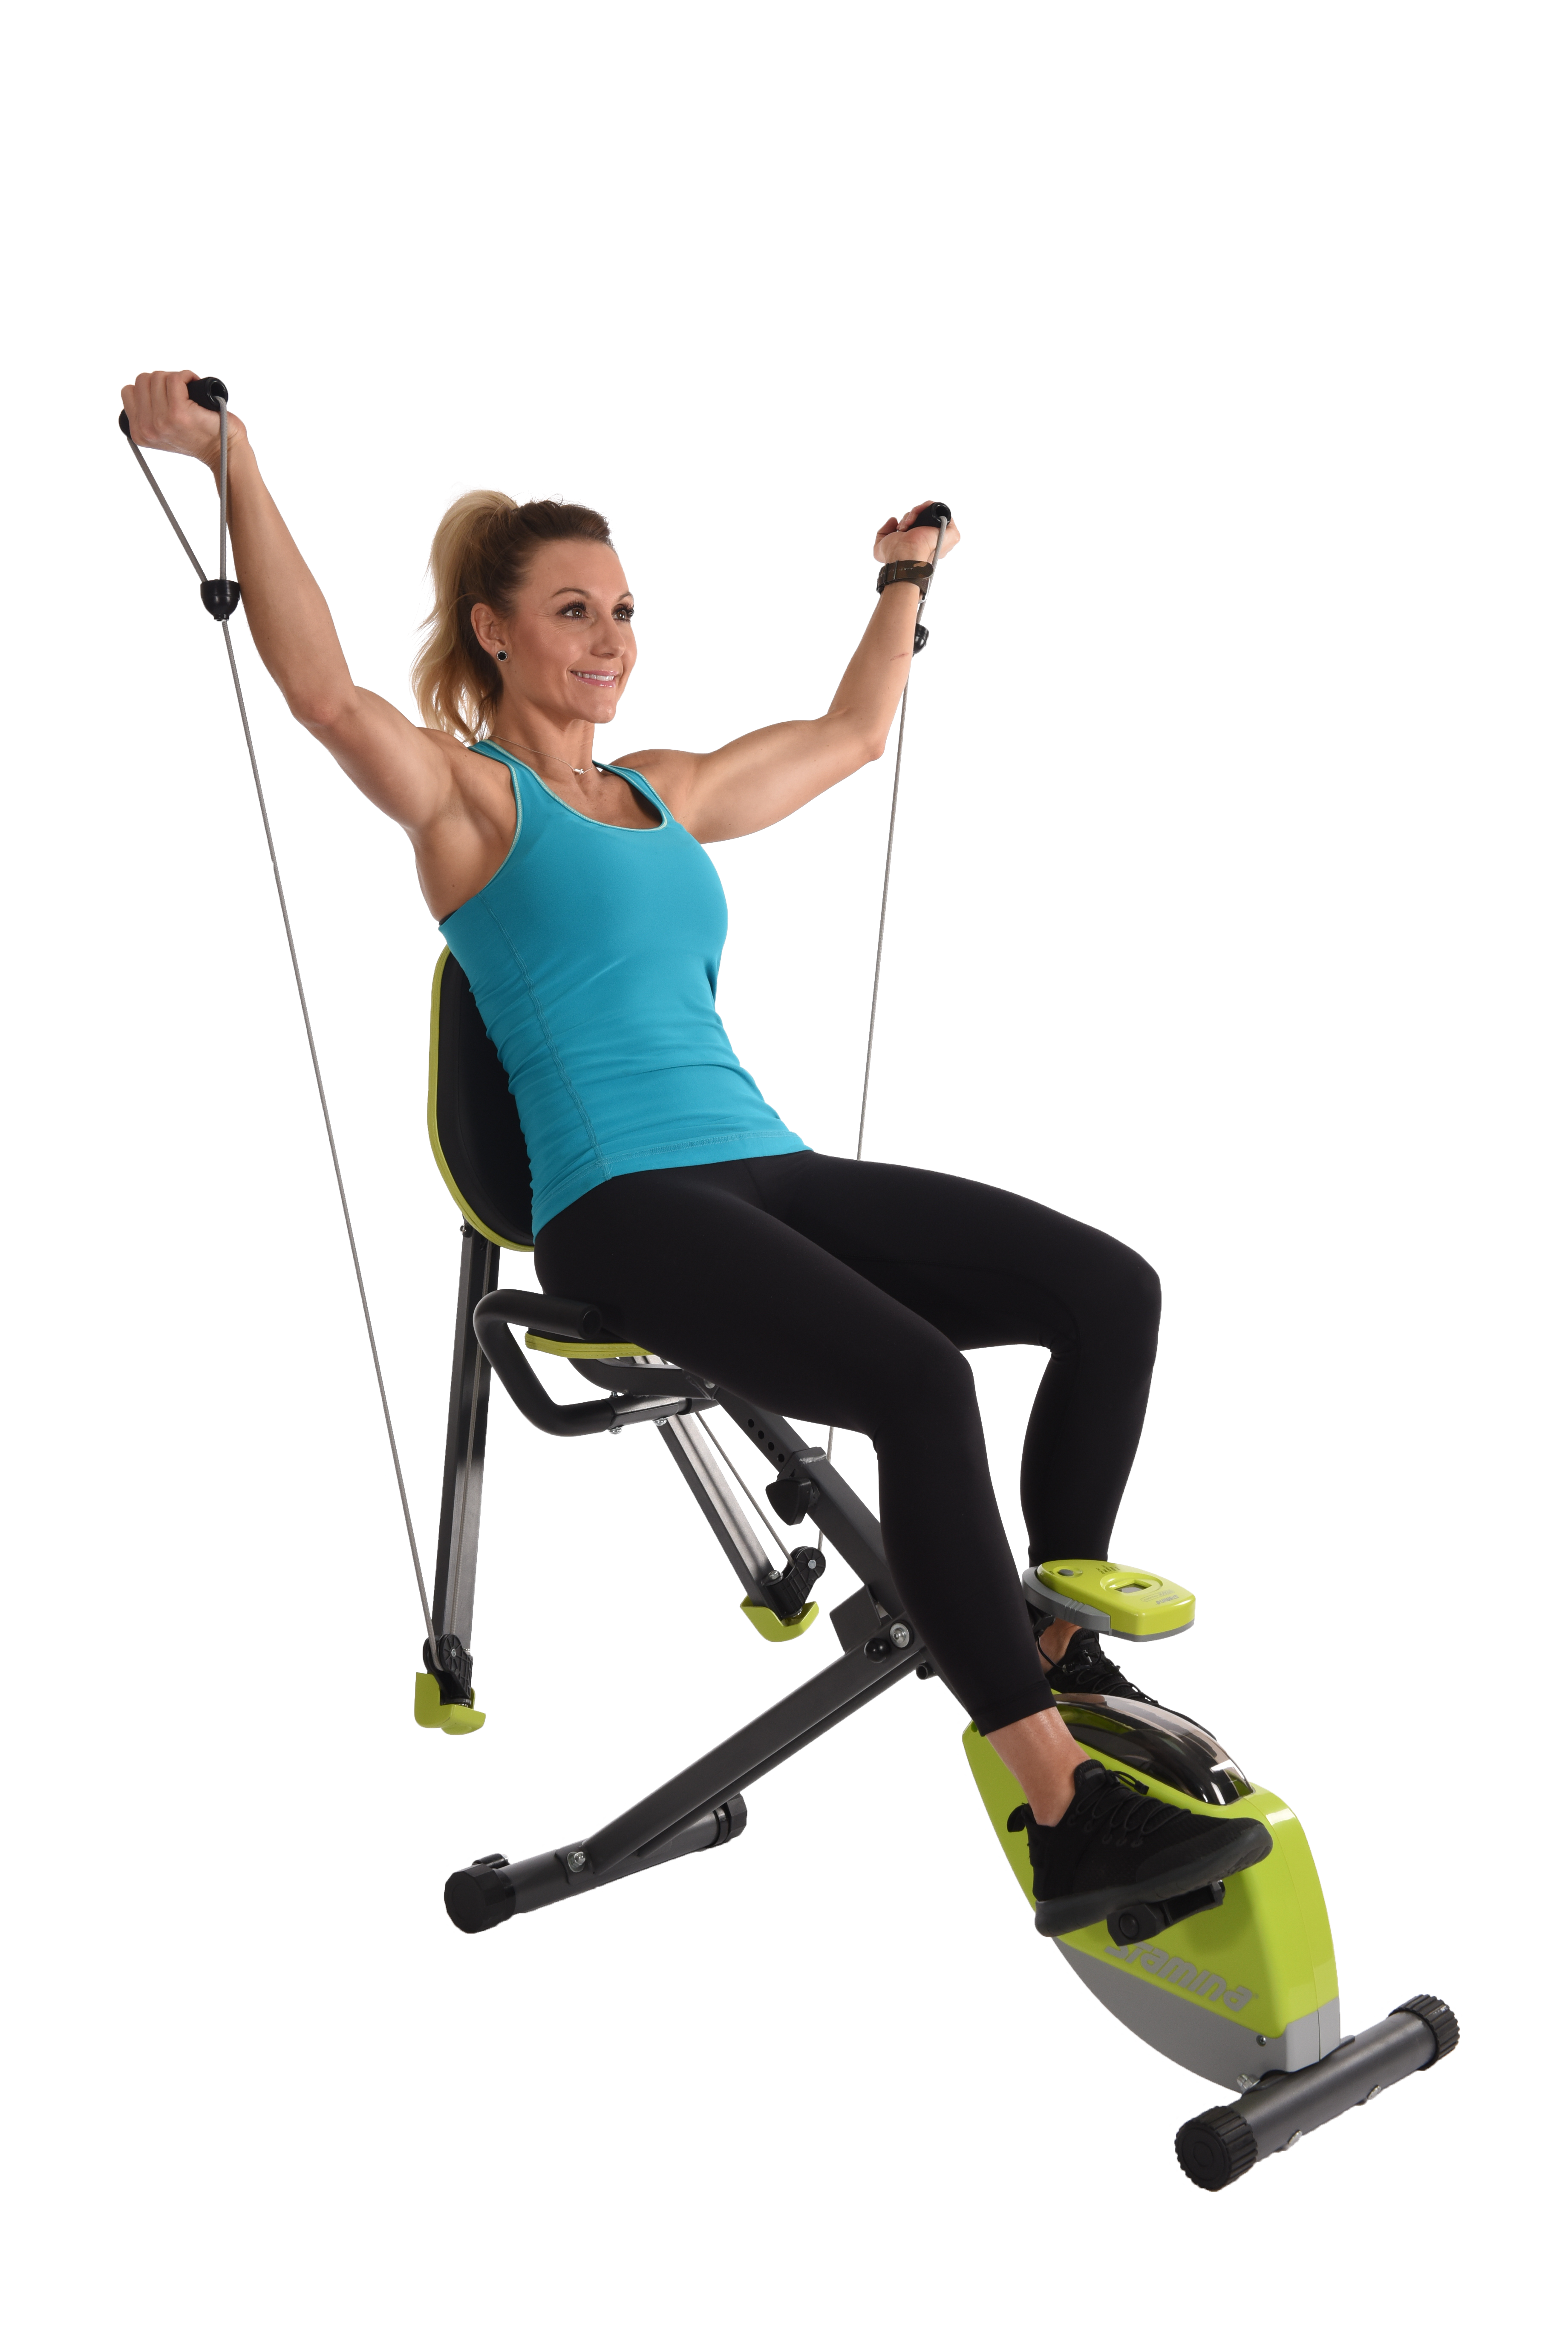 Performing incline flies on Stamina Wonder Exercise Bike With Strength System.